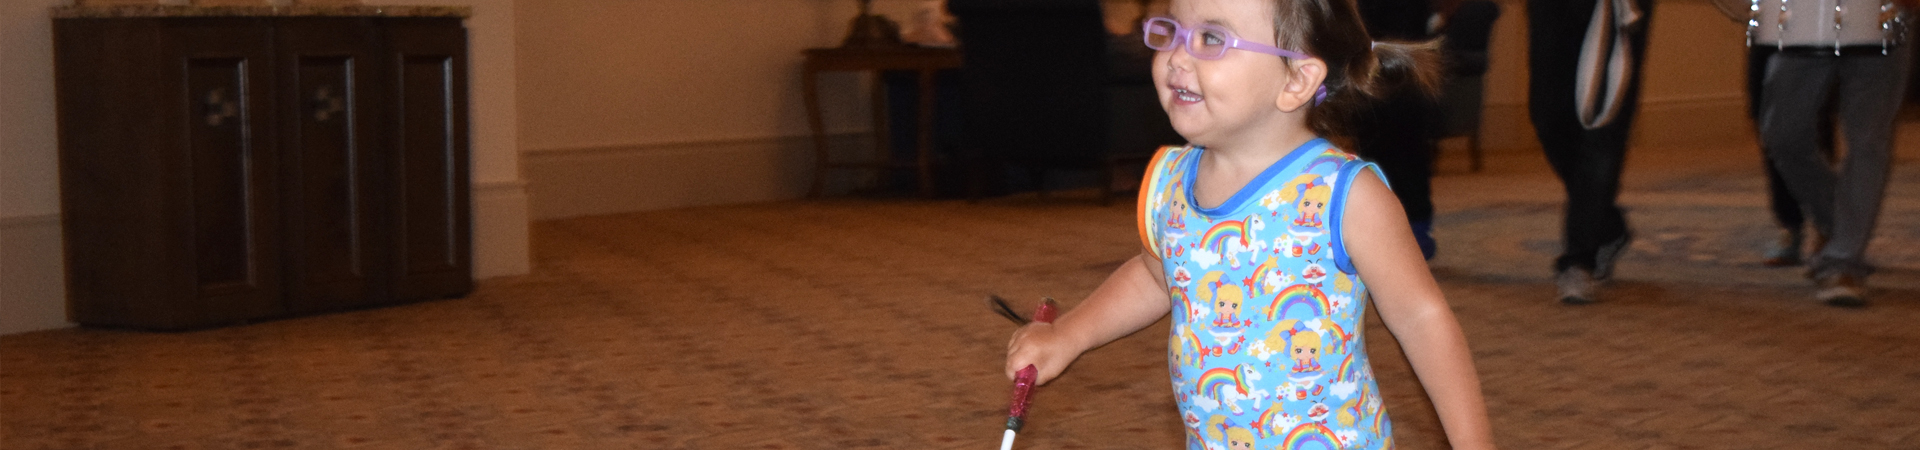 A blind toddler skips with her cane leading the way.